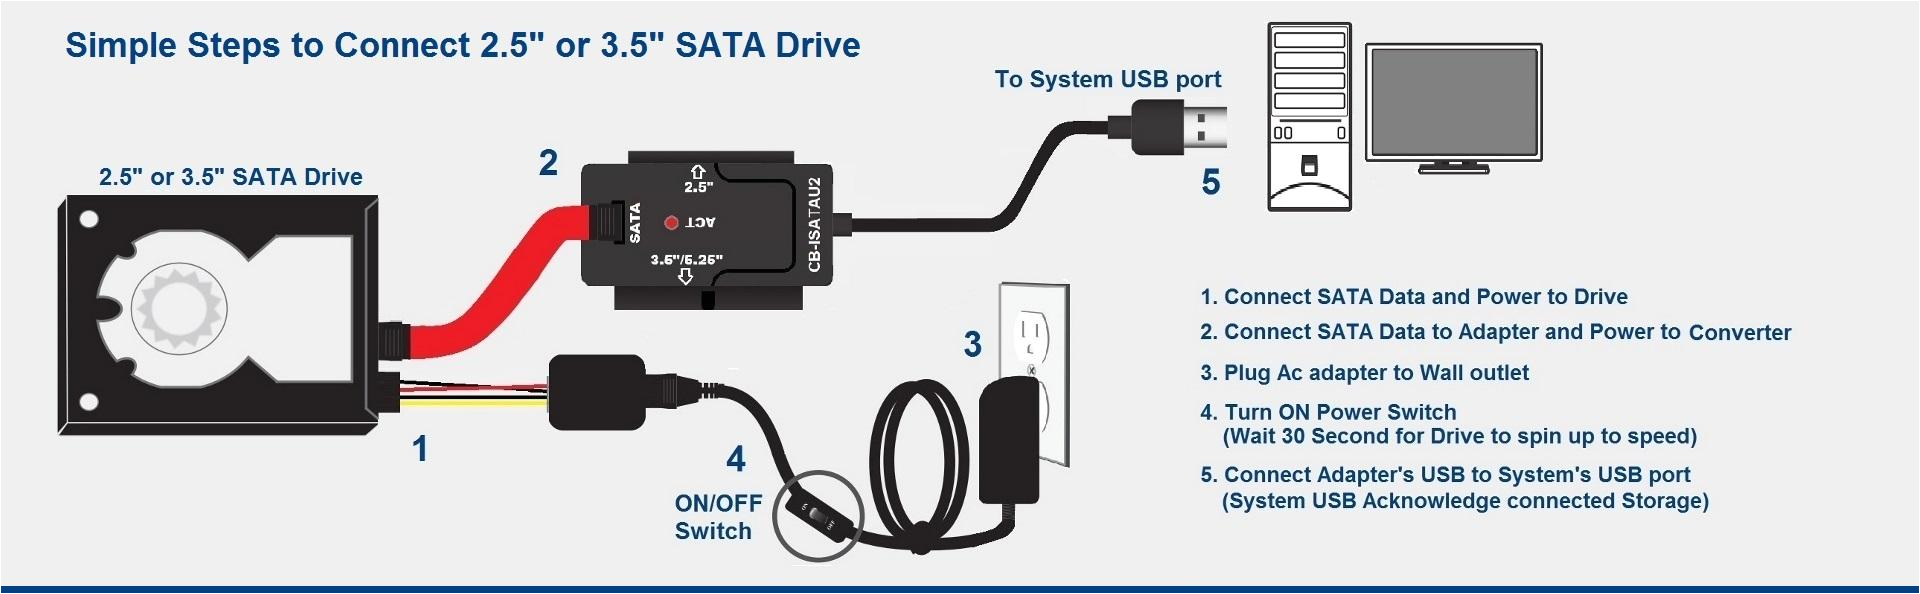 ide to usb cable wiring diagram wiring diagrams recentconnect ide to usb cable wiring diagram wiring